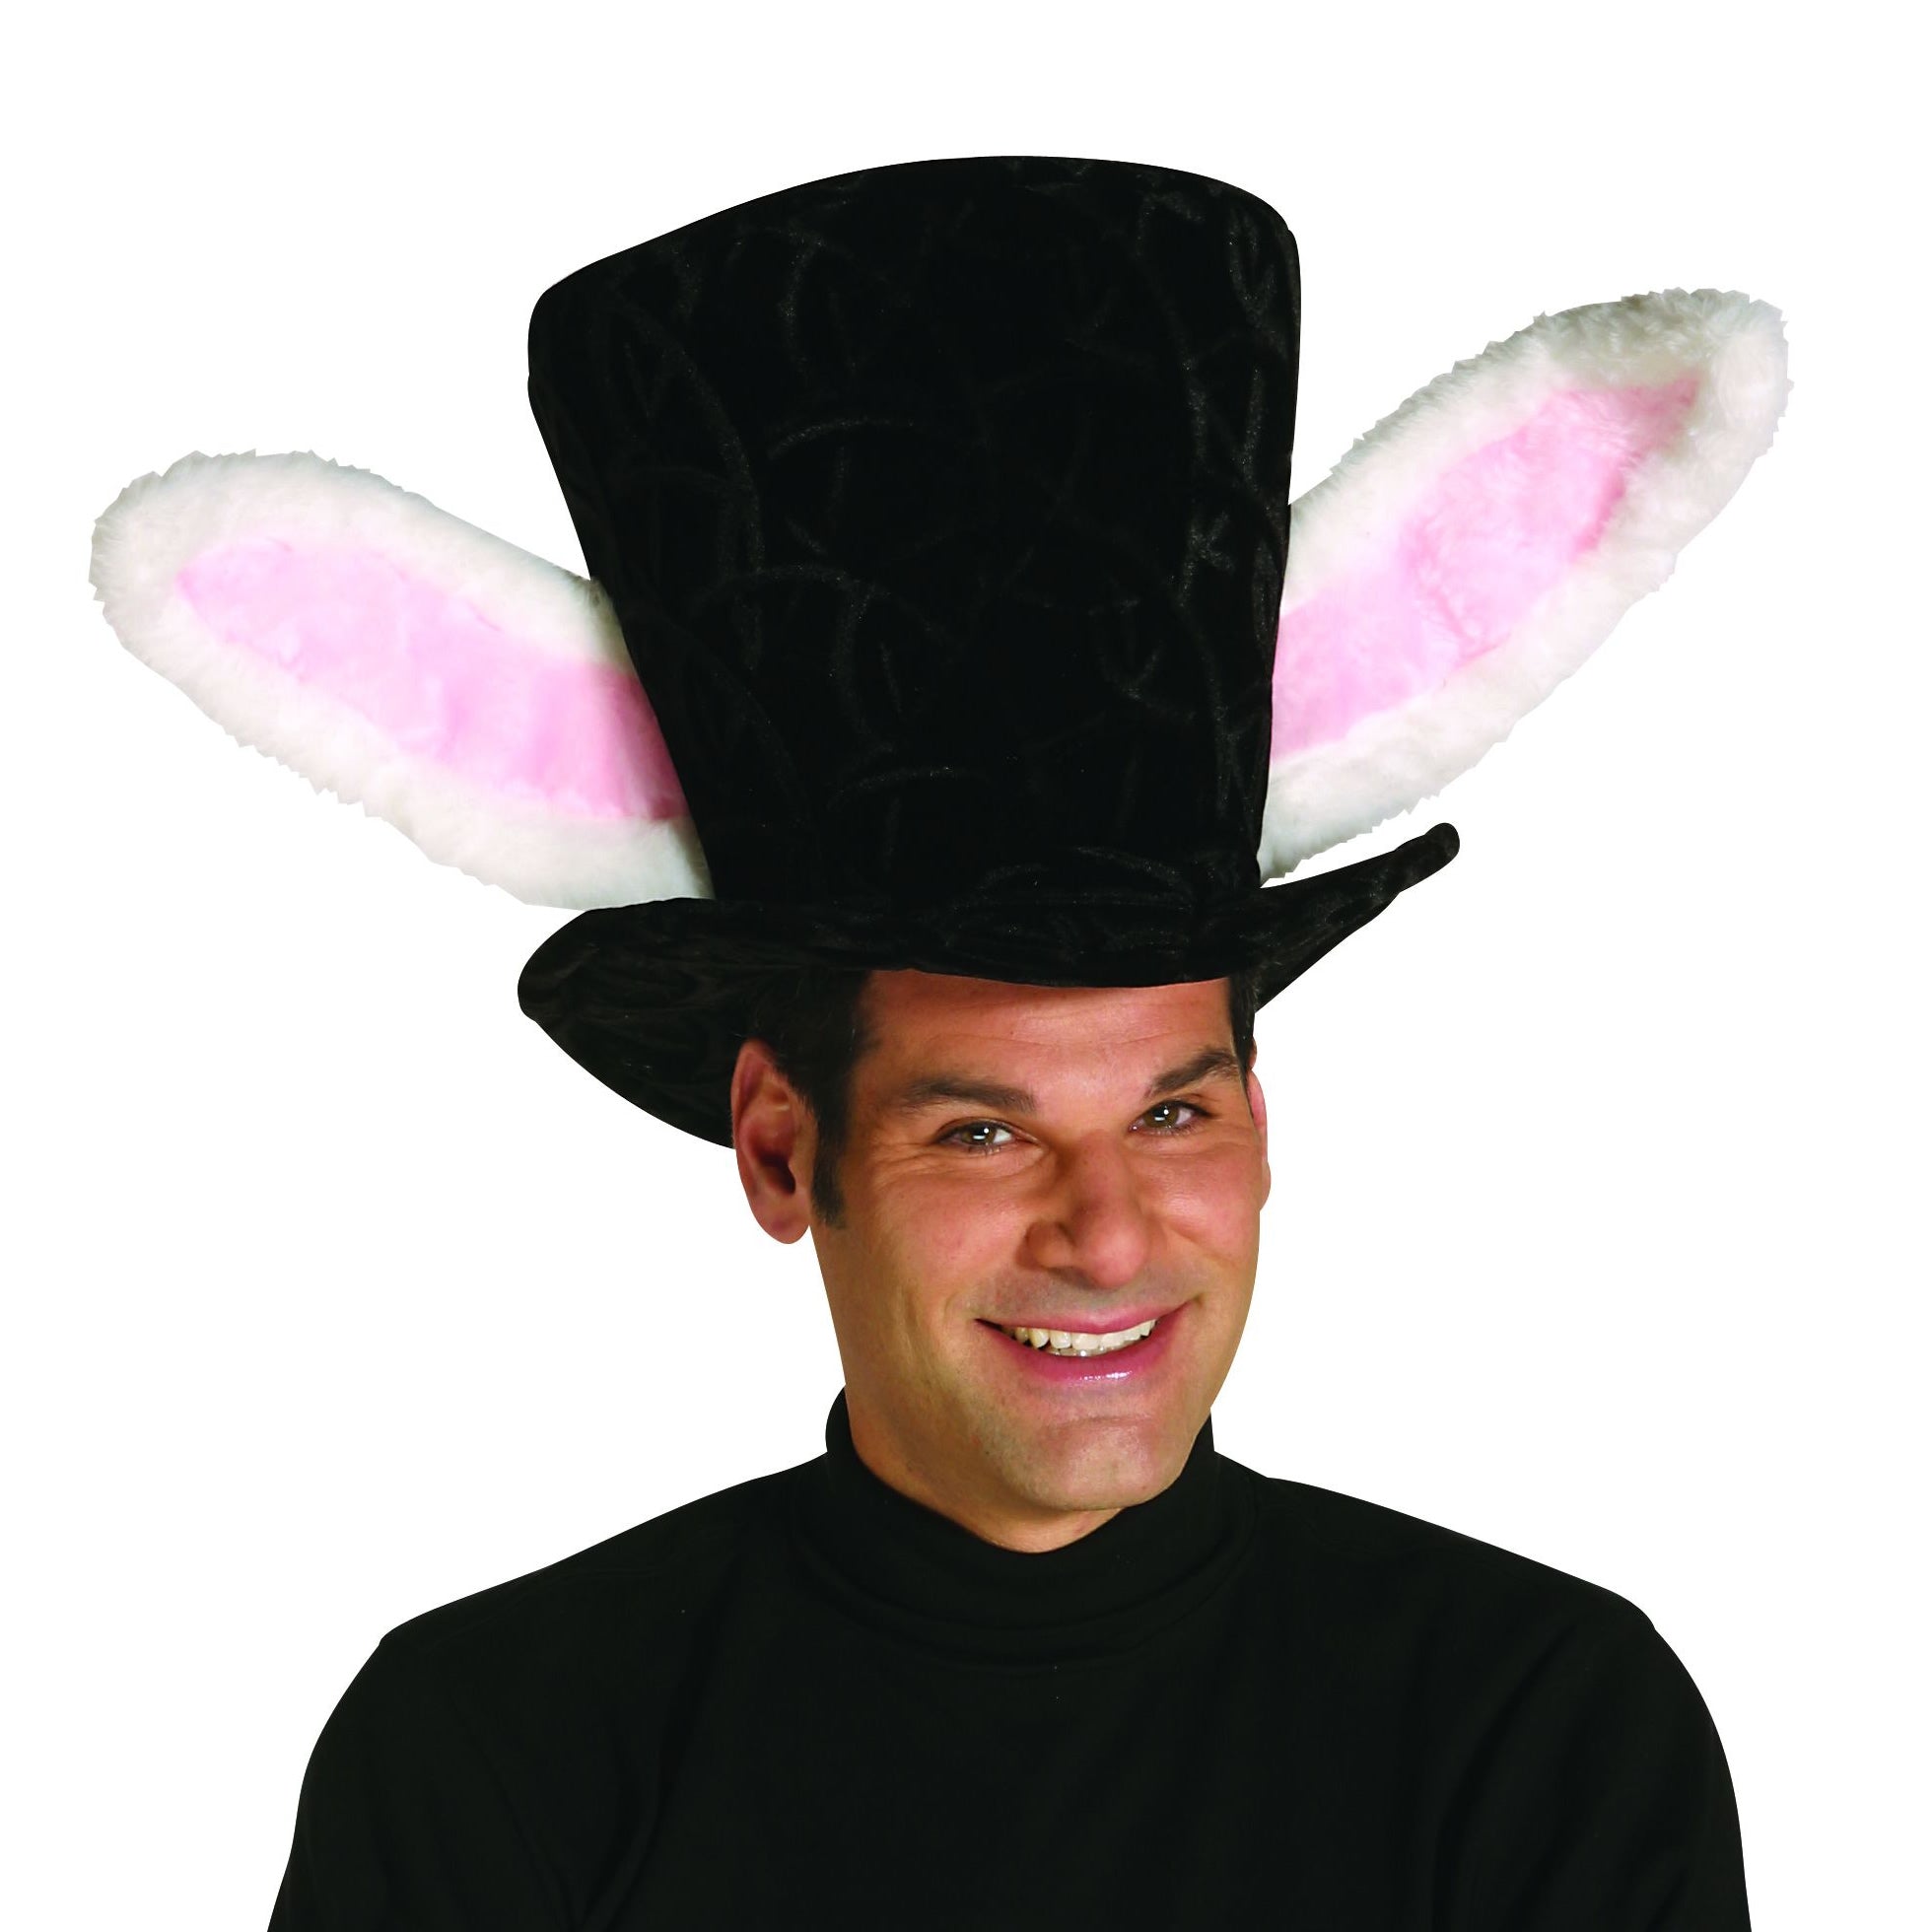 Large black hat with pink and white bunny ears